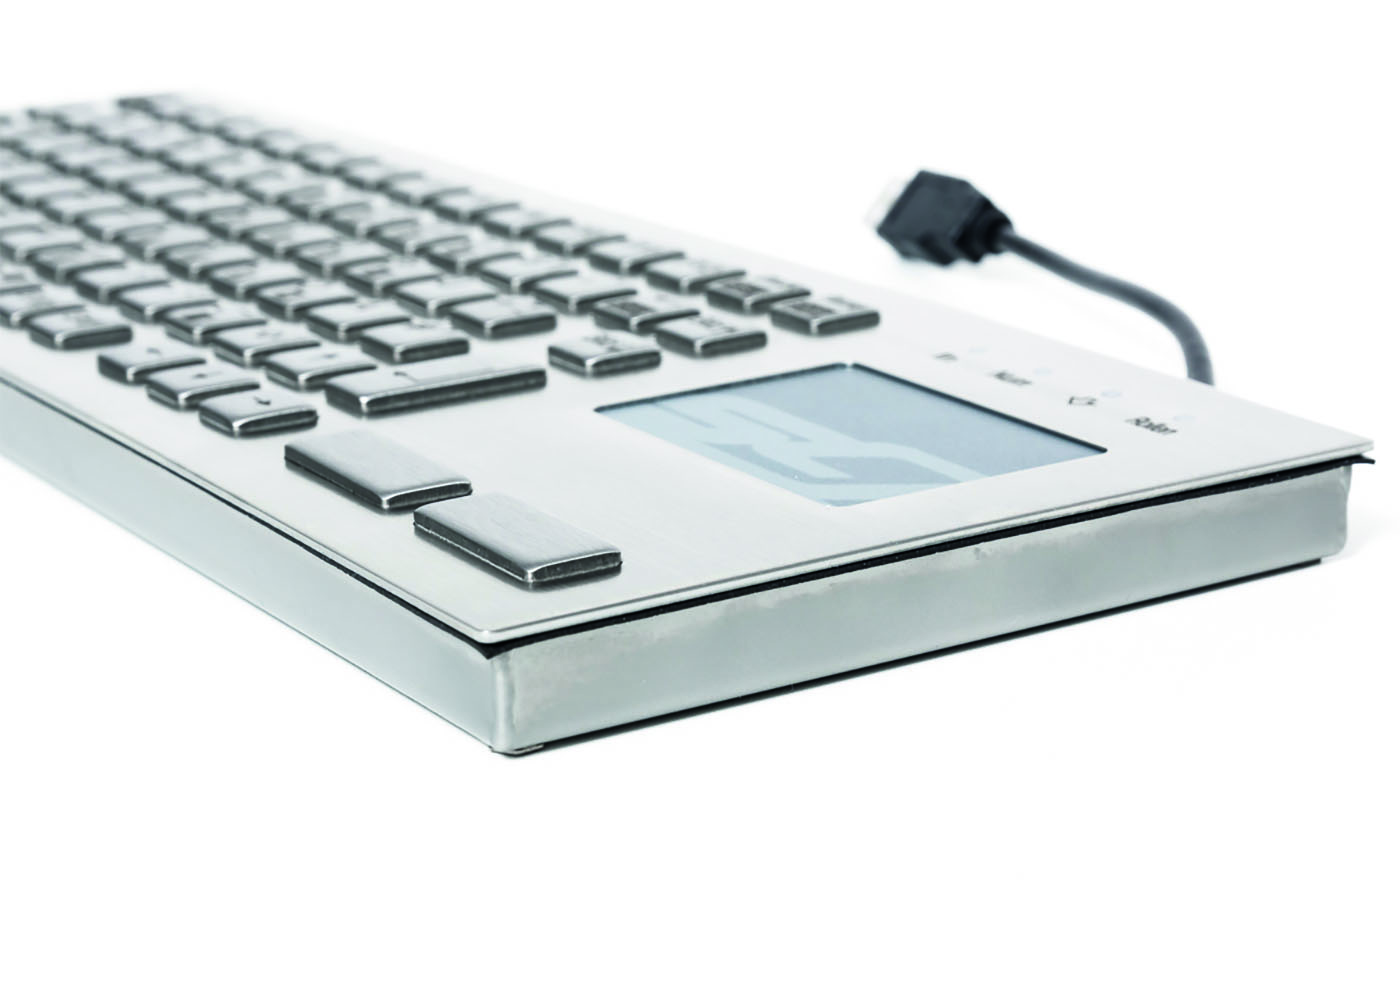 Clavier inox 86 touches antistaique et sans silicone – LABS-free – touchpad